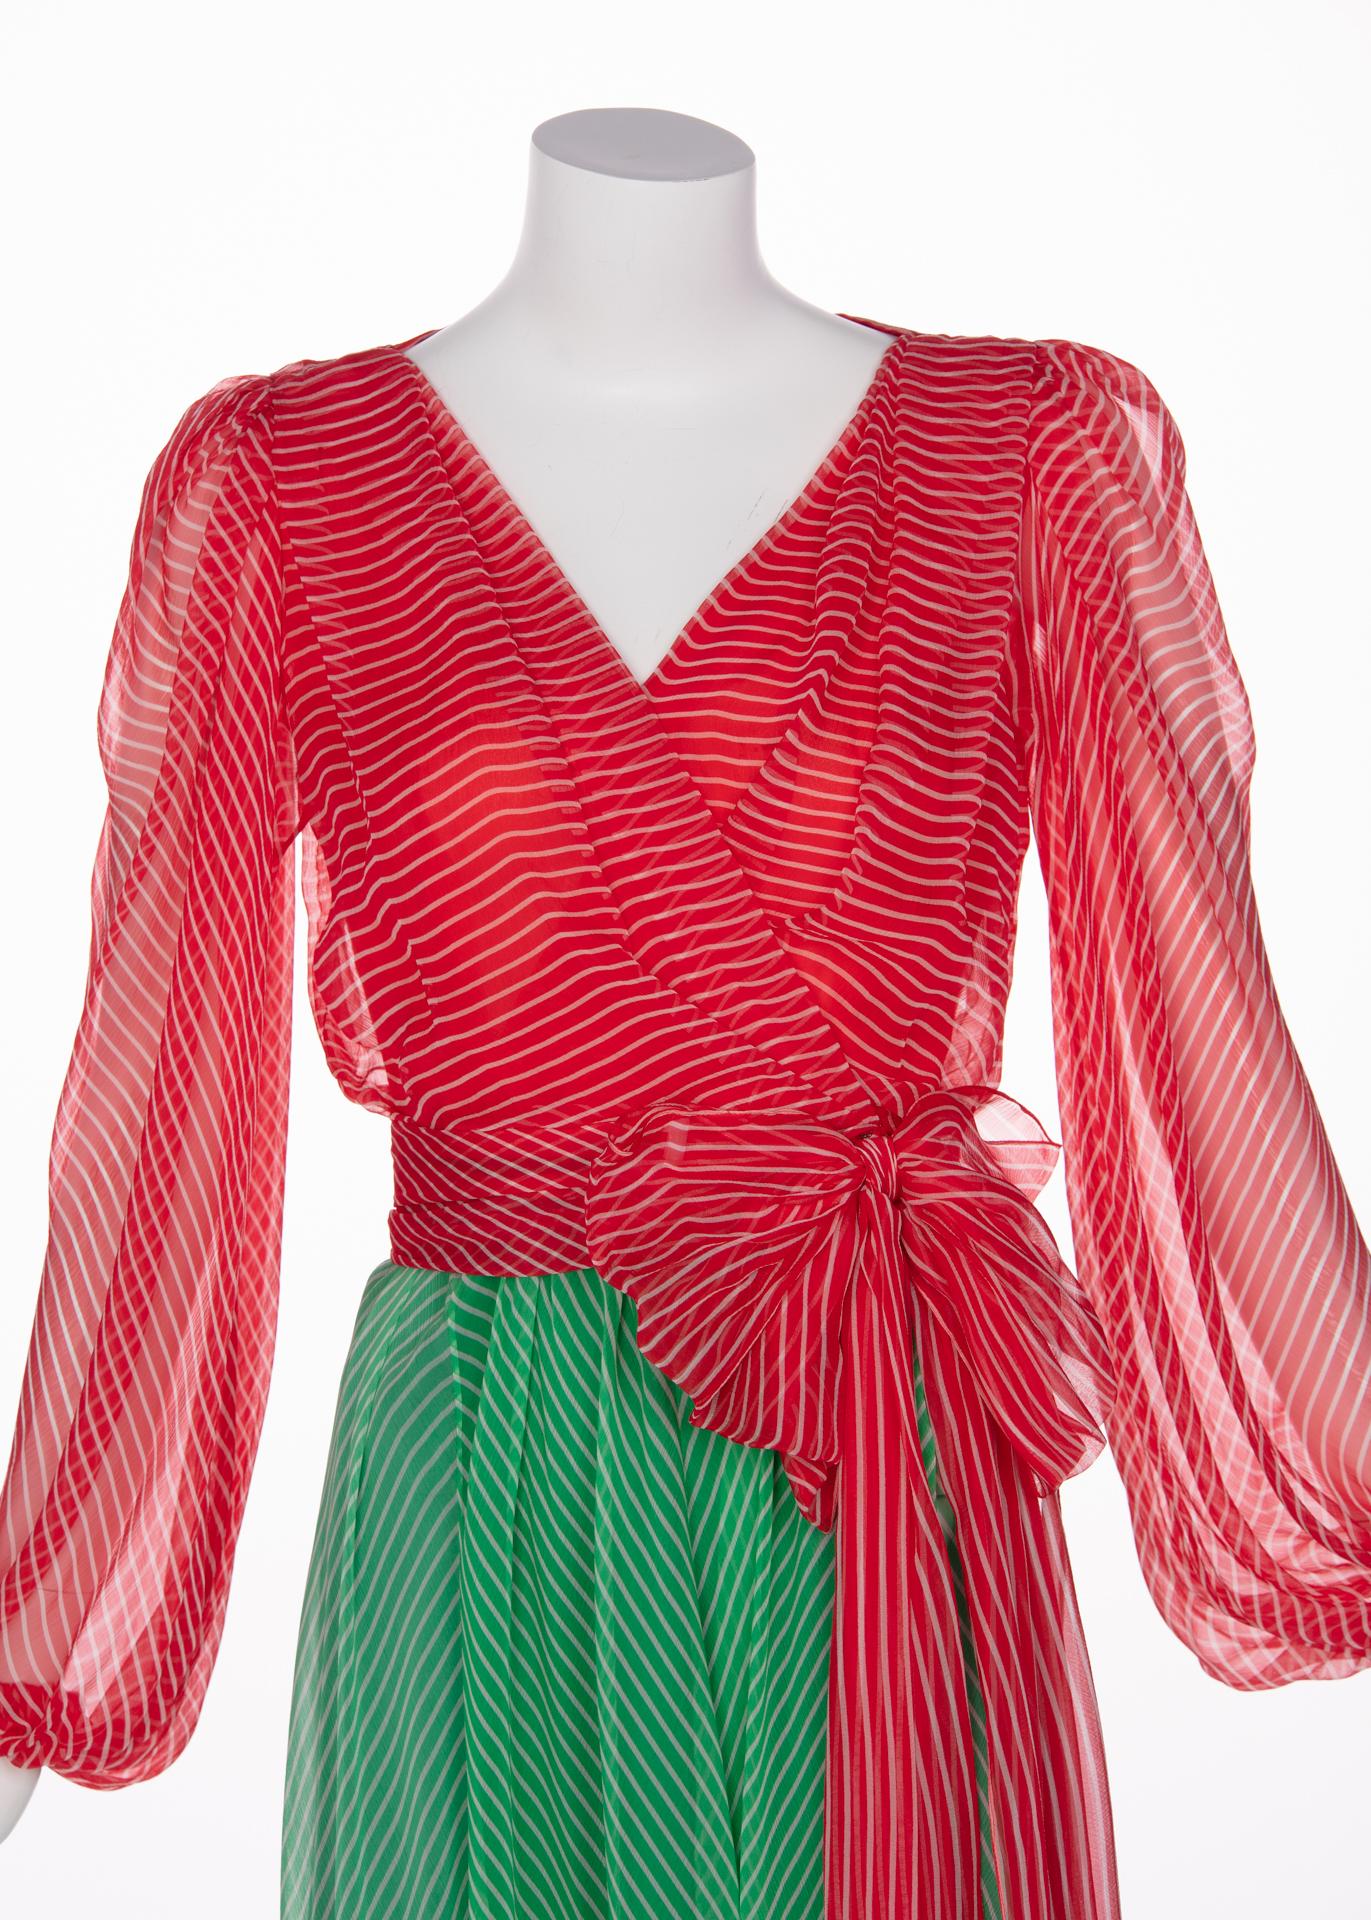 Yves Saint Laurent YSL Haute Couture Red / Green Stripe Silk Chiffon Dress, 1991 For Sale 3